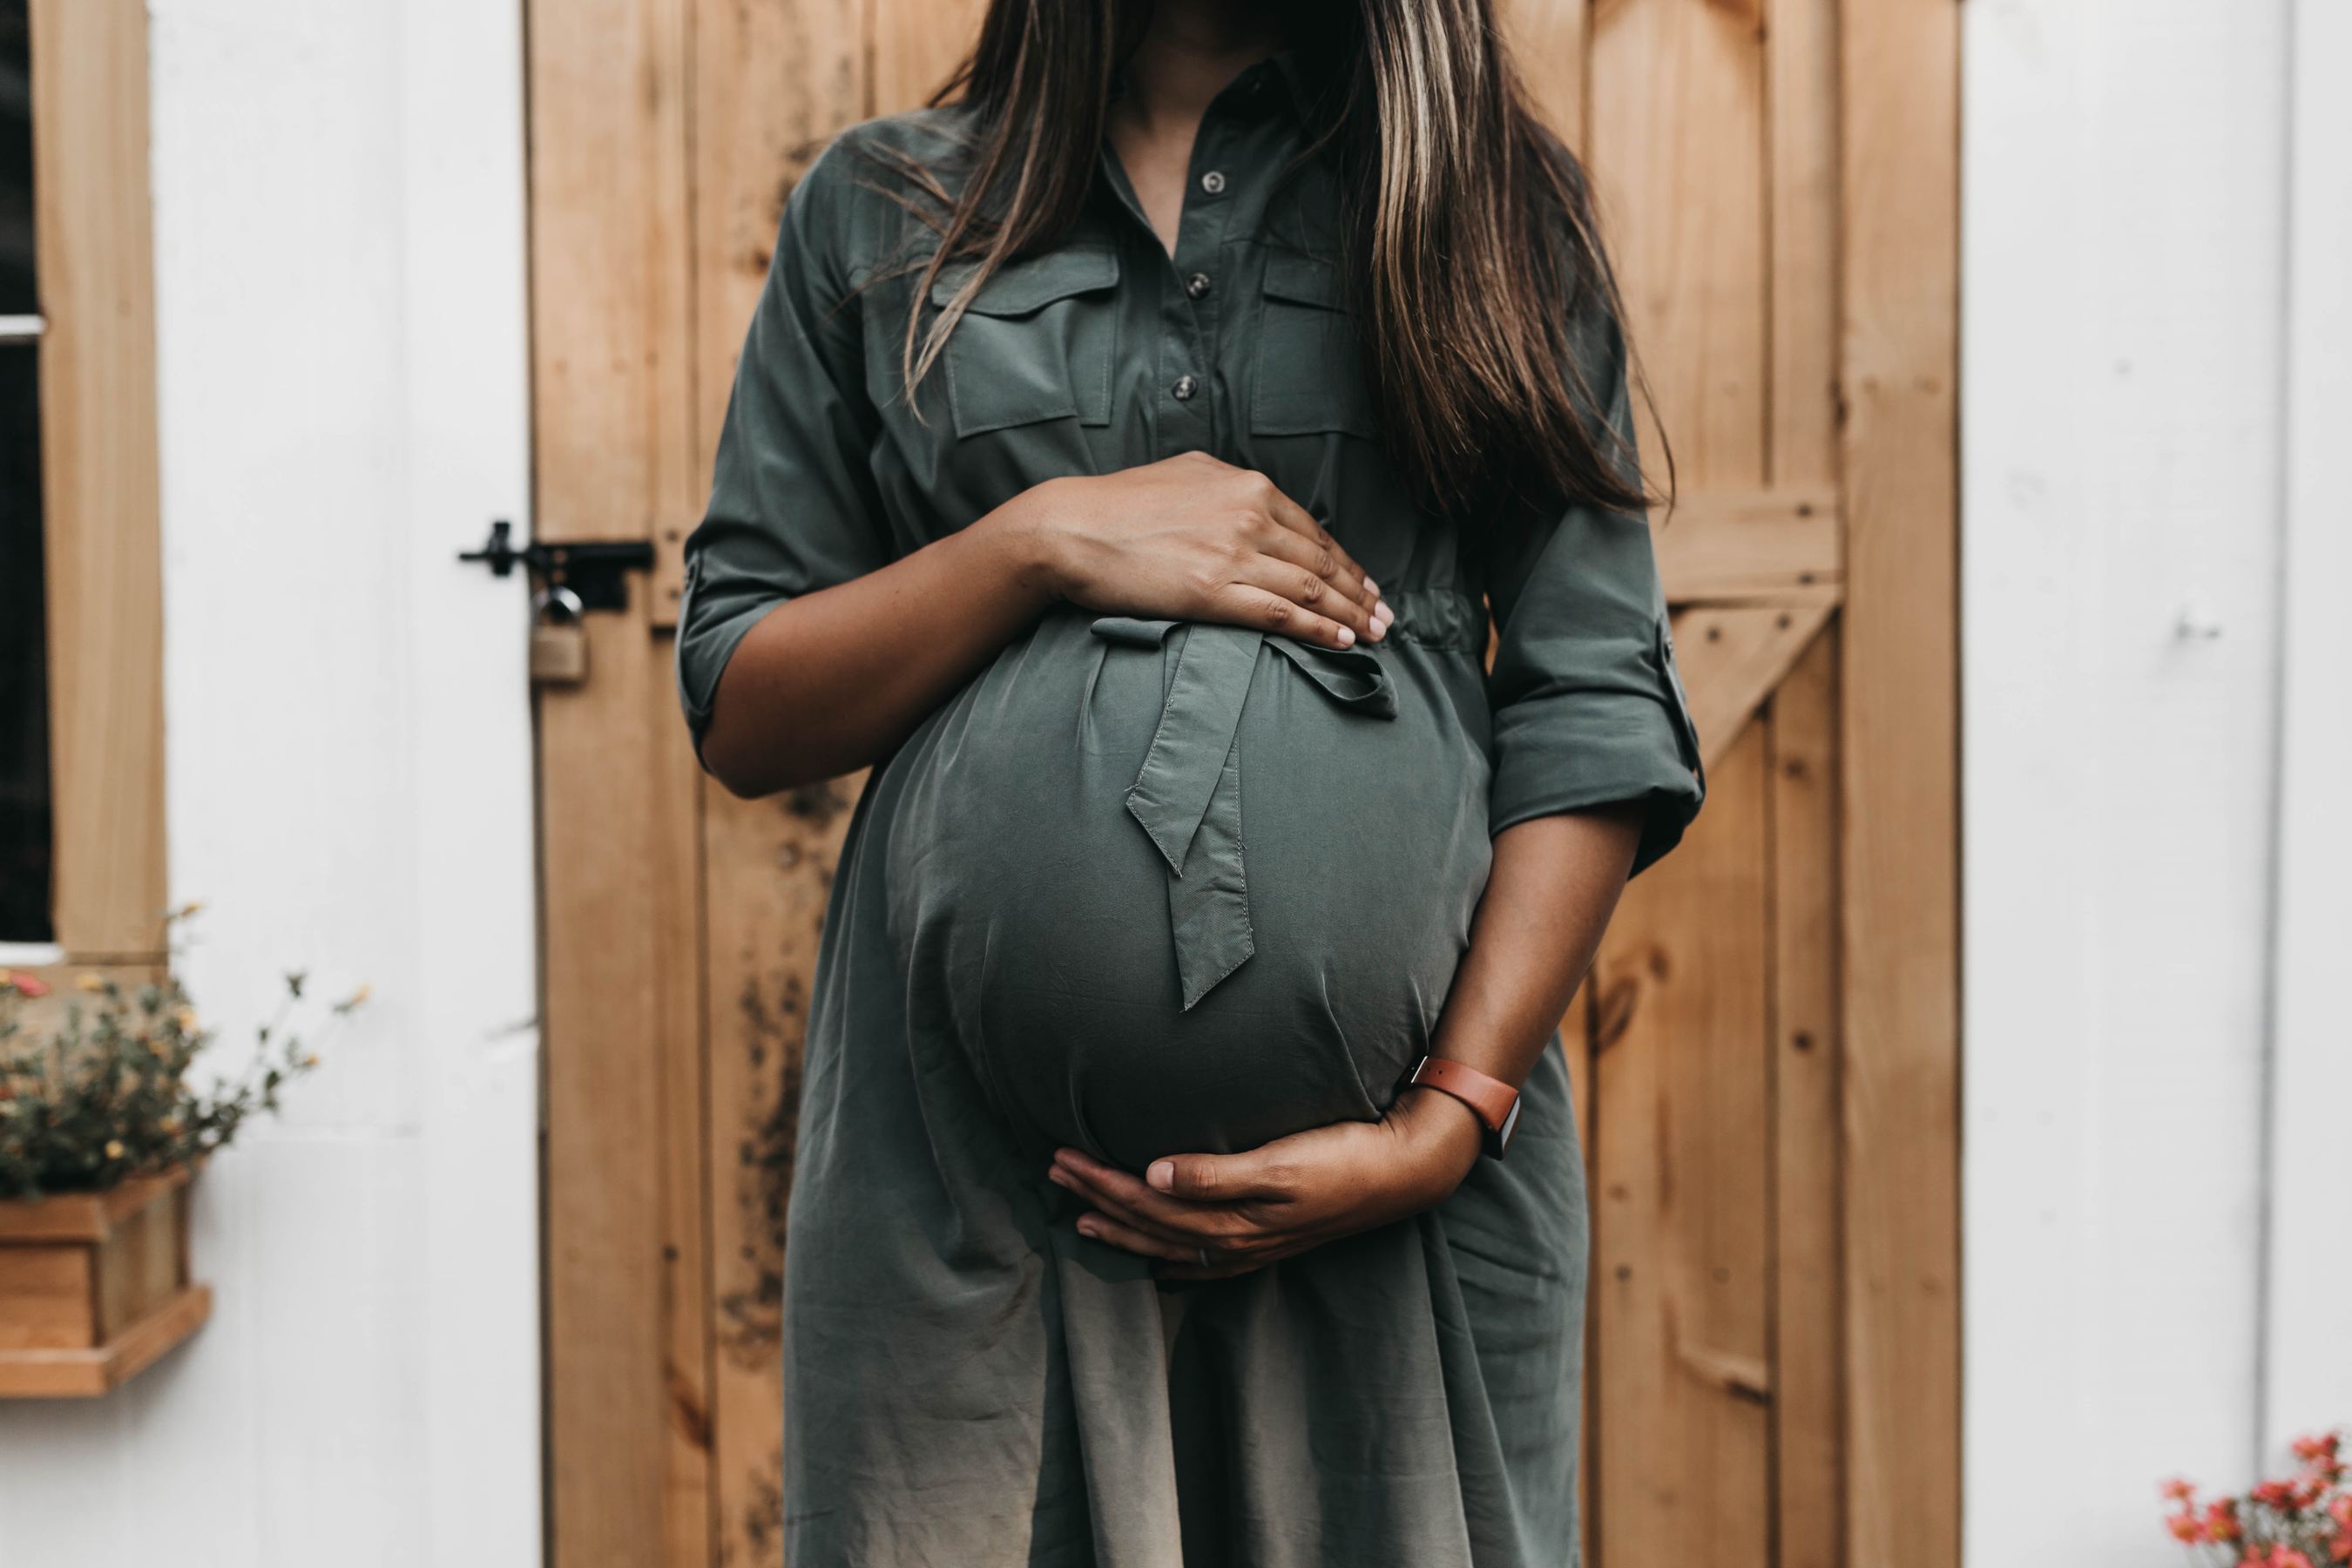 Pregnant woman standing against a door